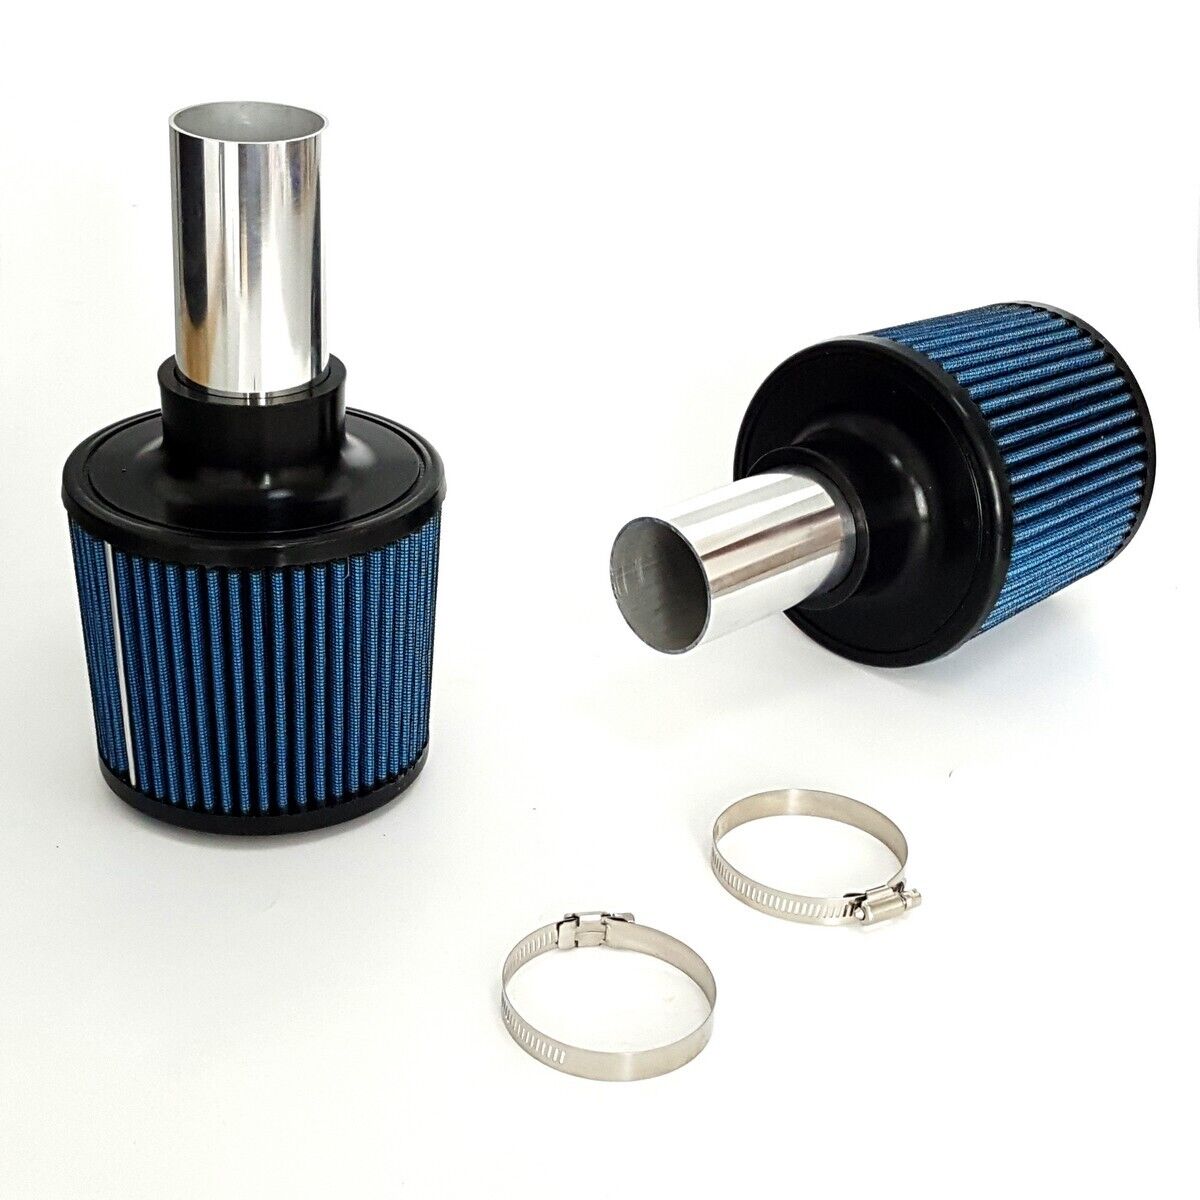 Blue N54 Dual Cone Filter Air Intake Kit for BMW 135i 335i 535i 3.0L Twin Turbo